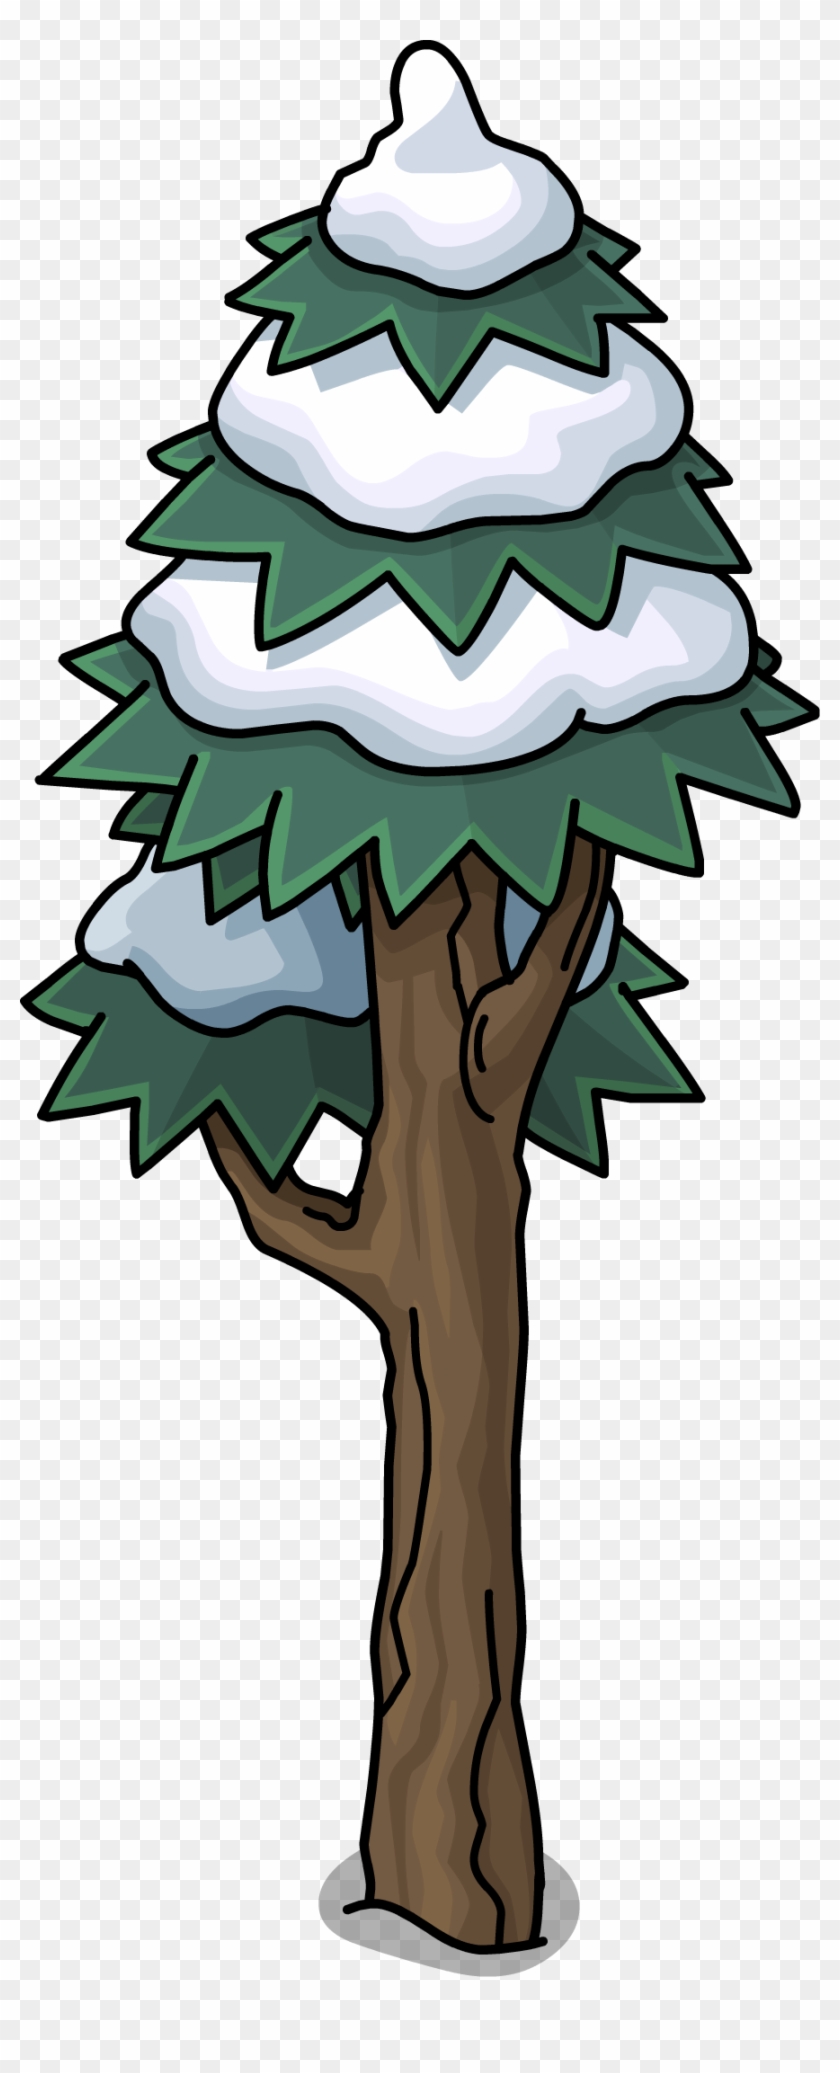 January Clipart Snowtree - Club Penguin Tall Tree - Png Download #2731034